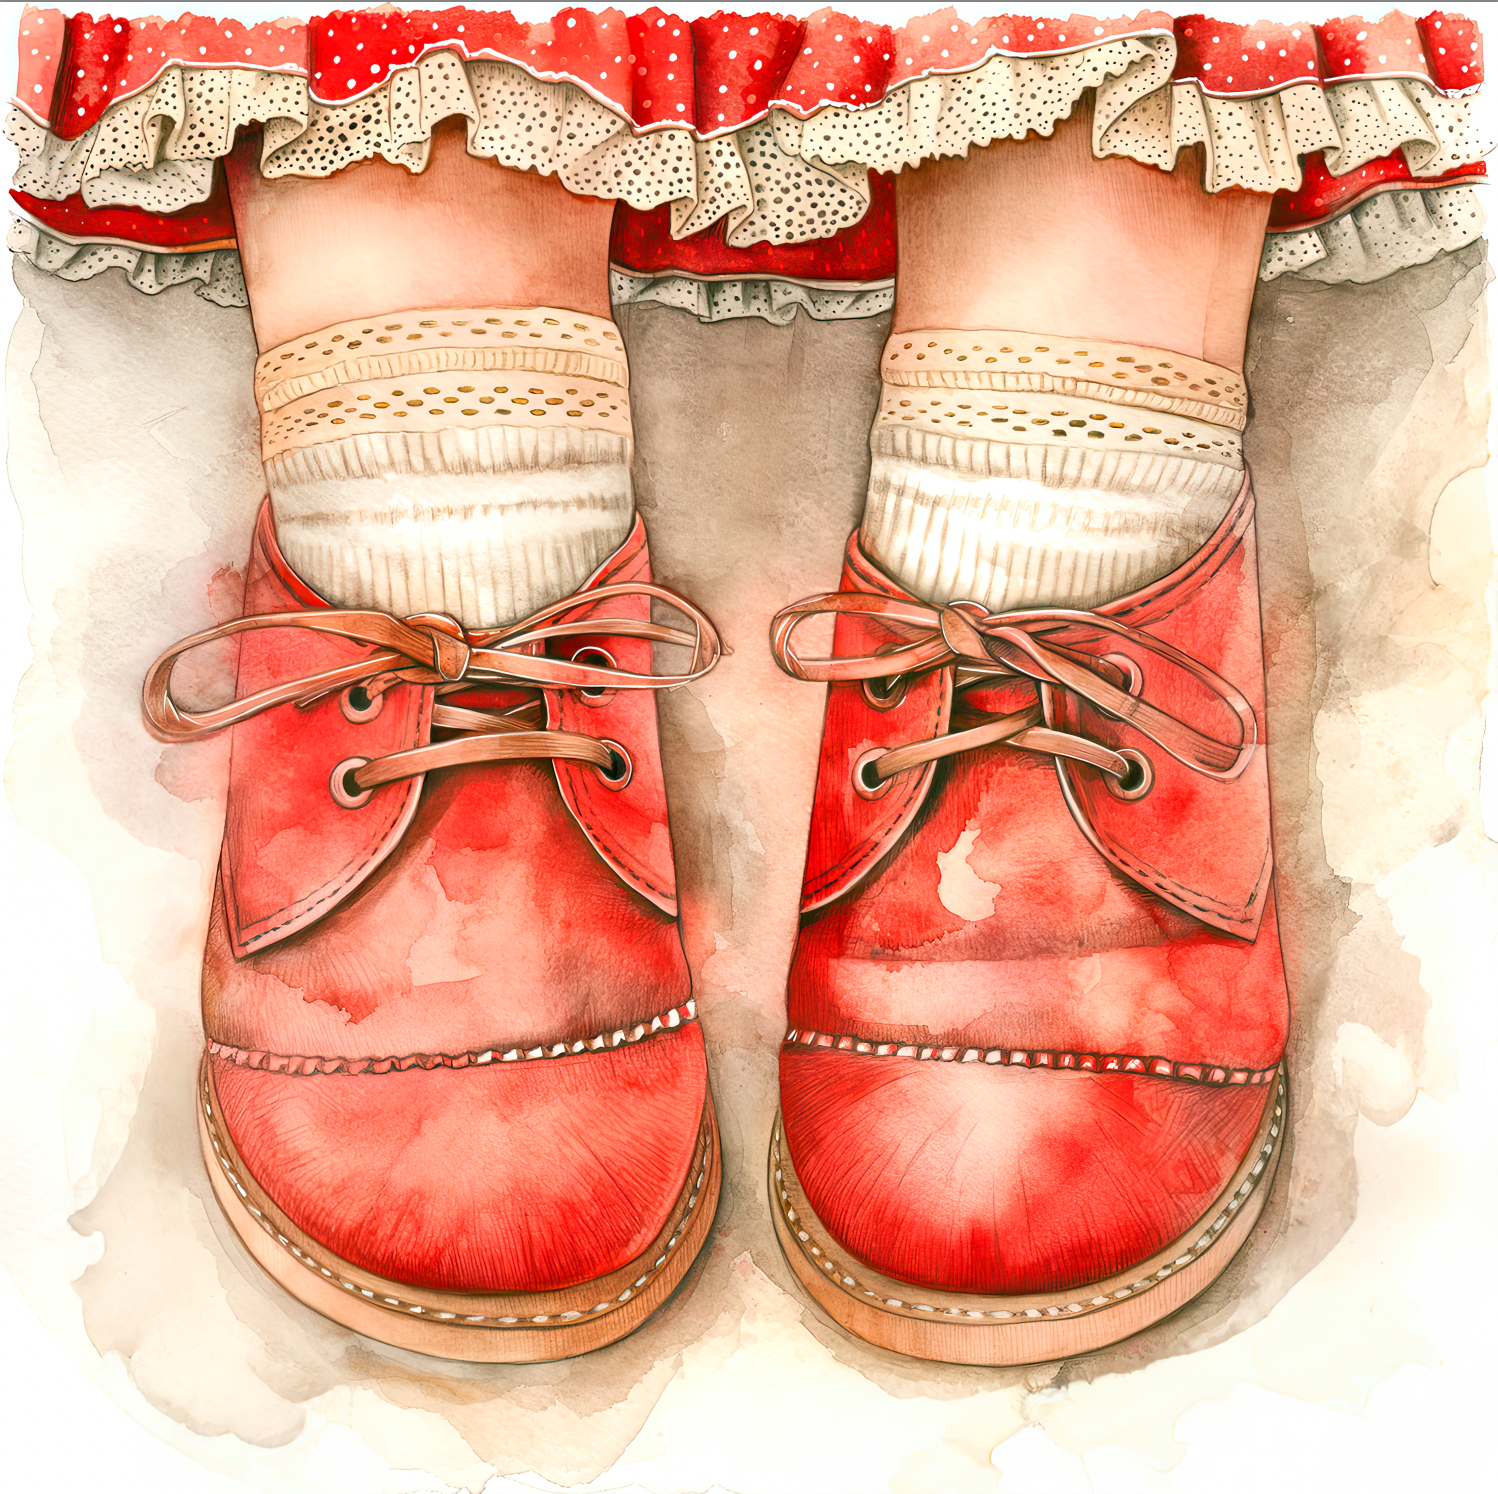 Watercolor vintage style little girl's red leather shoes tied neatly with brown laces. She wears eyelet lace detailed socks and an adorable hint of a red skirt with lace hem shows at the top of the piece. Wall art for sale at customconcepts.art